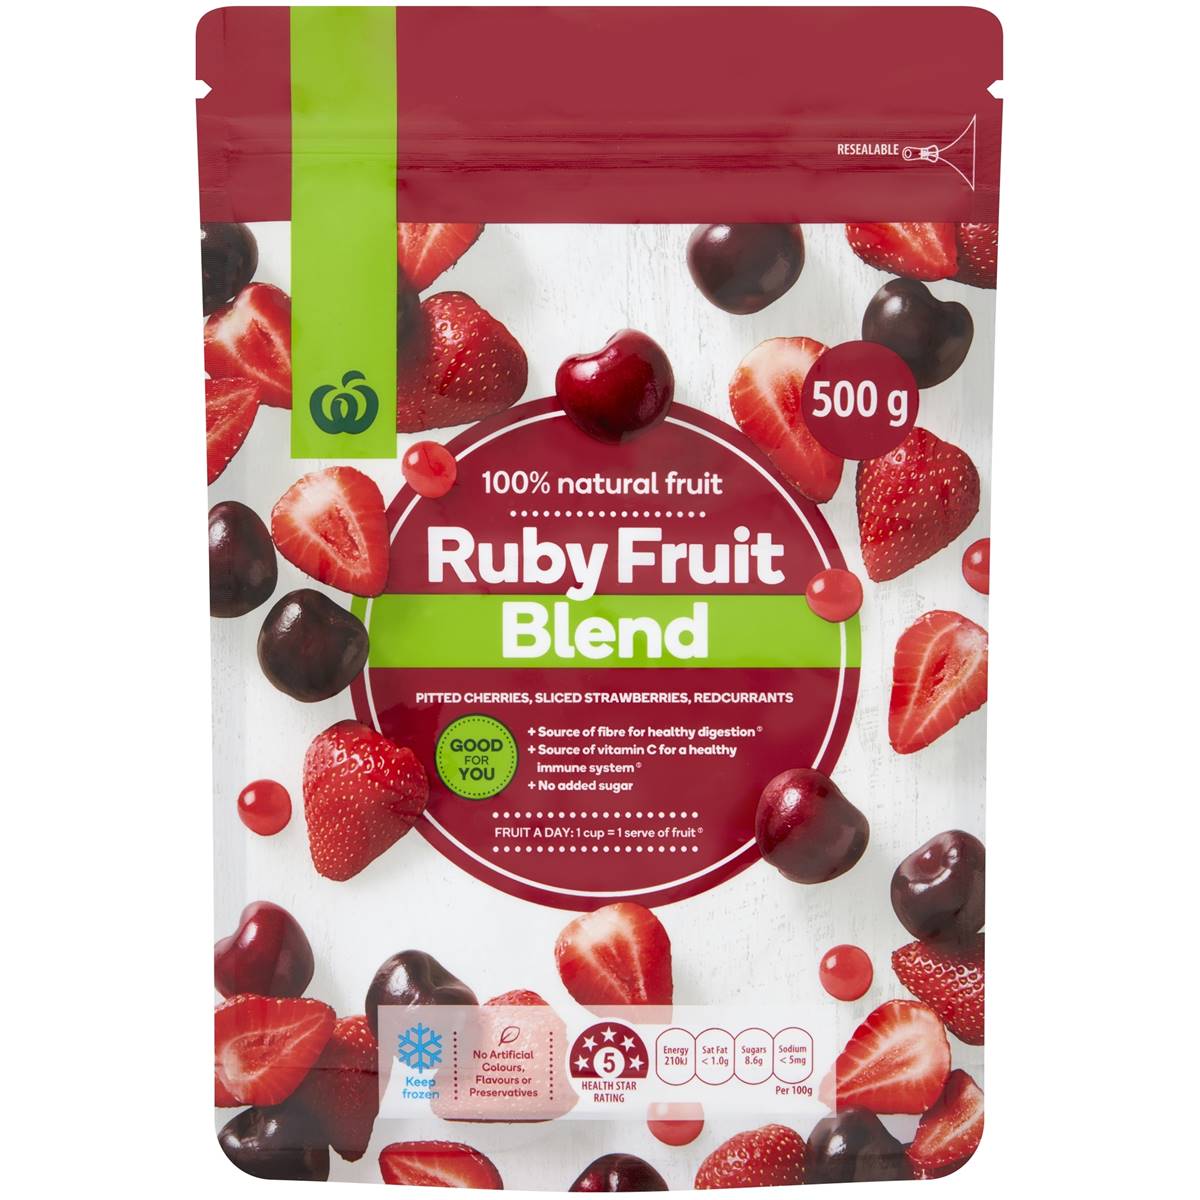 Calories in Woolworths Ruby Frozen Fruit Blend